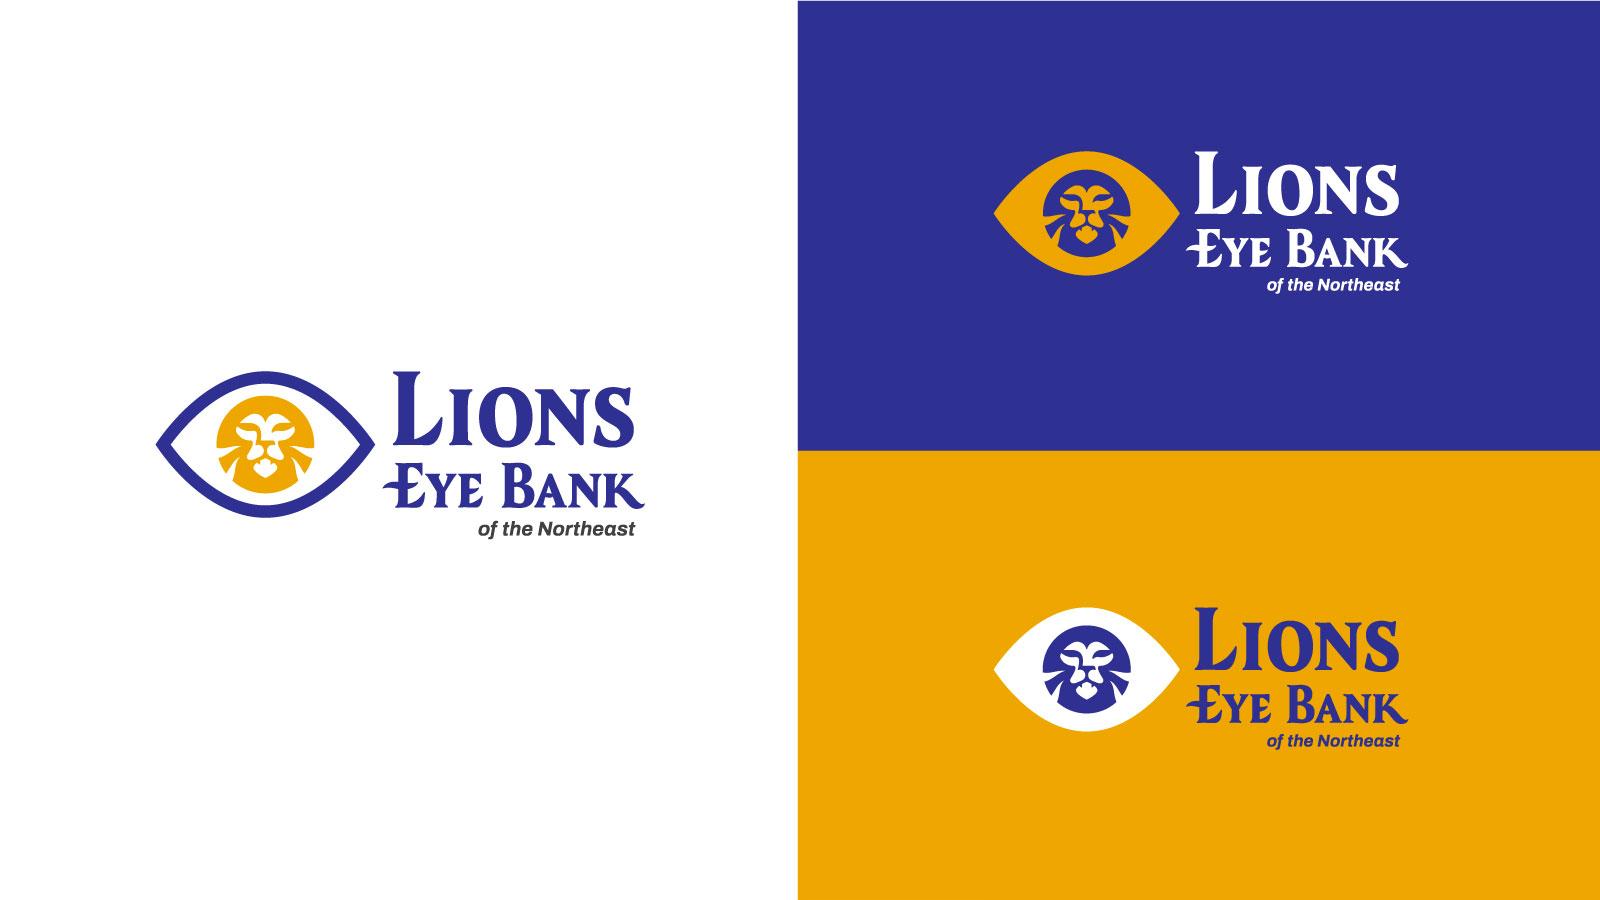 Lions Eye Bank of the Northeast | Logo Variations